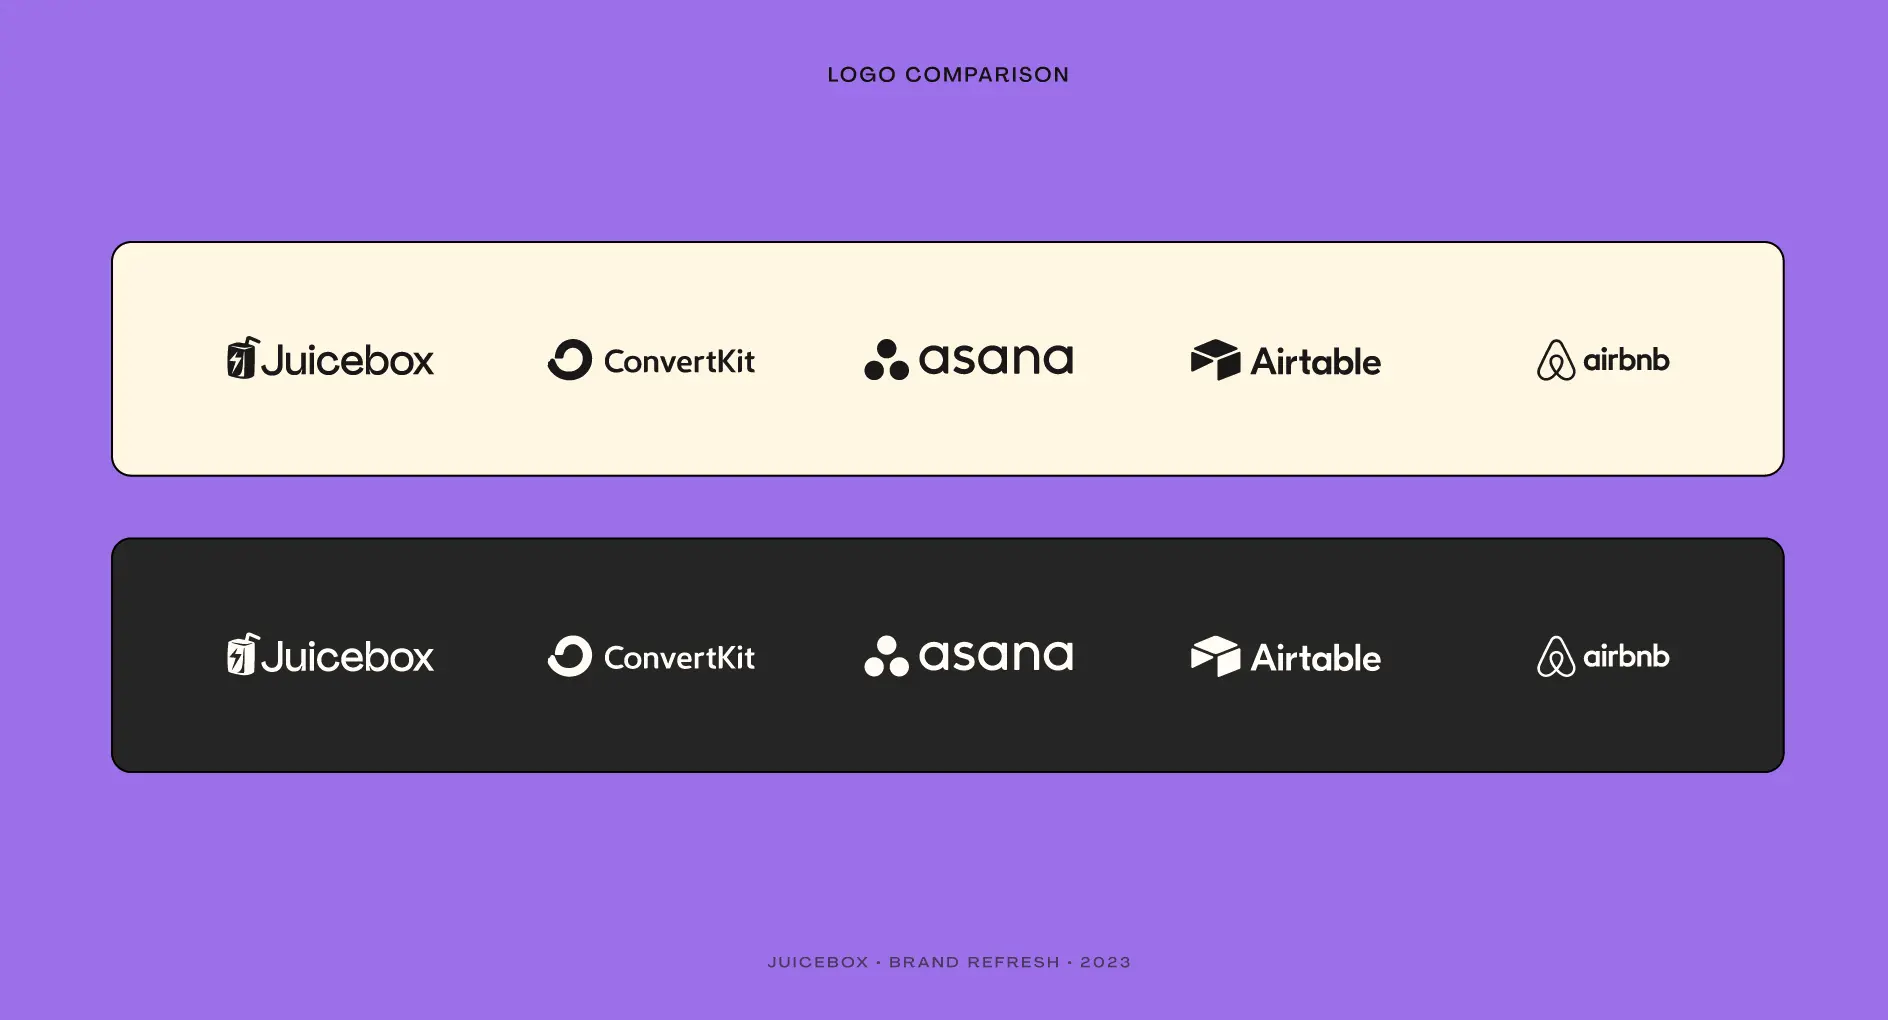 Comparison with other branding